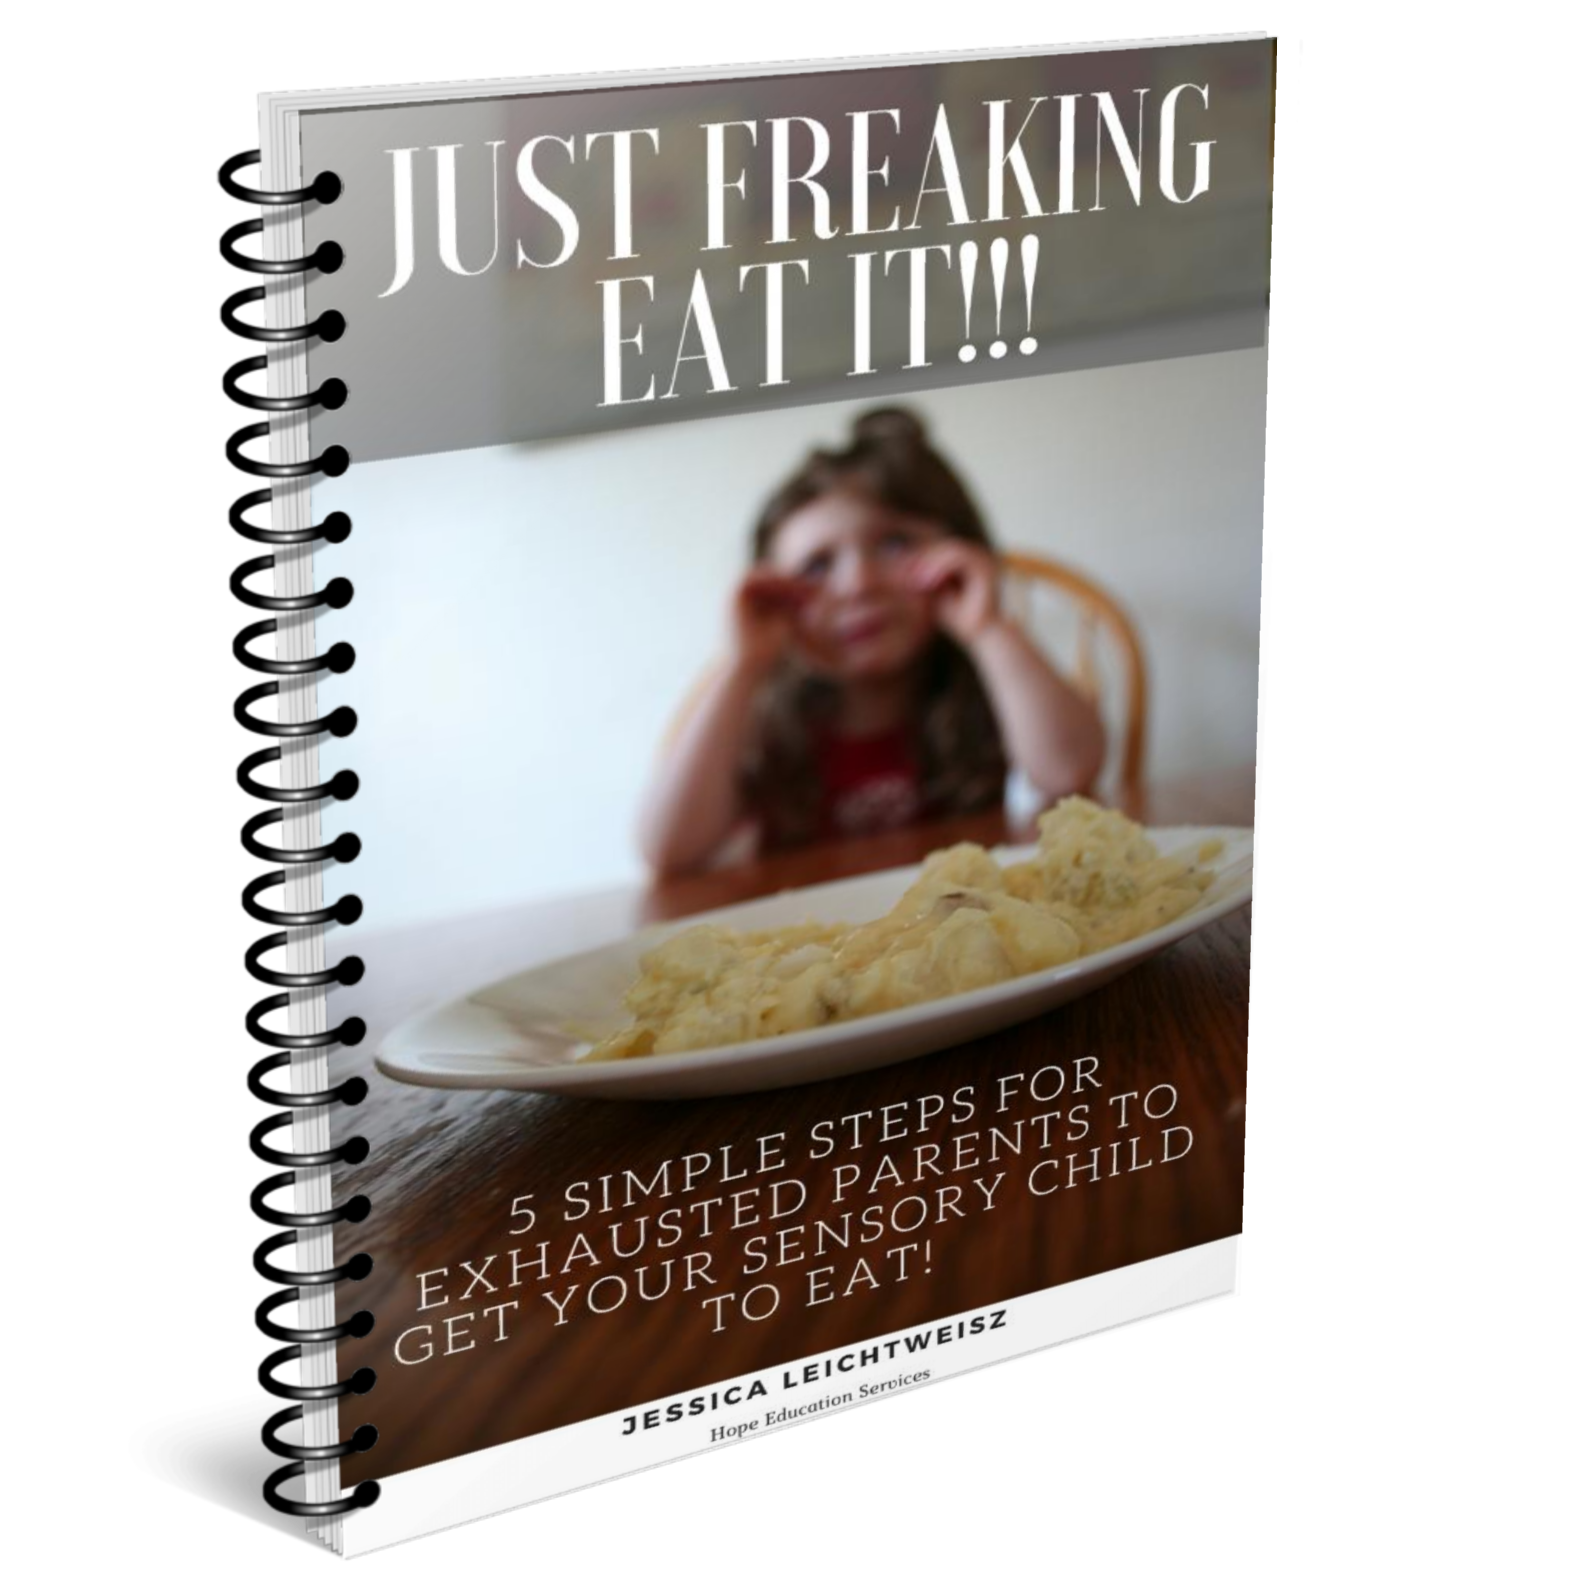 Just Freaking Eat It: 5 Steps for Exhausted Parents to Get Your Sensory Child to Eat!